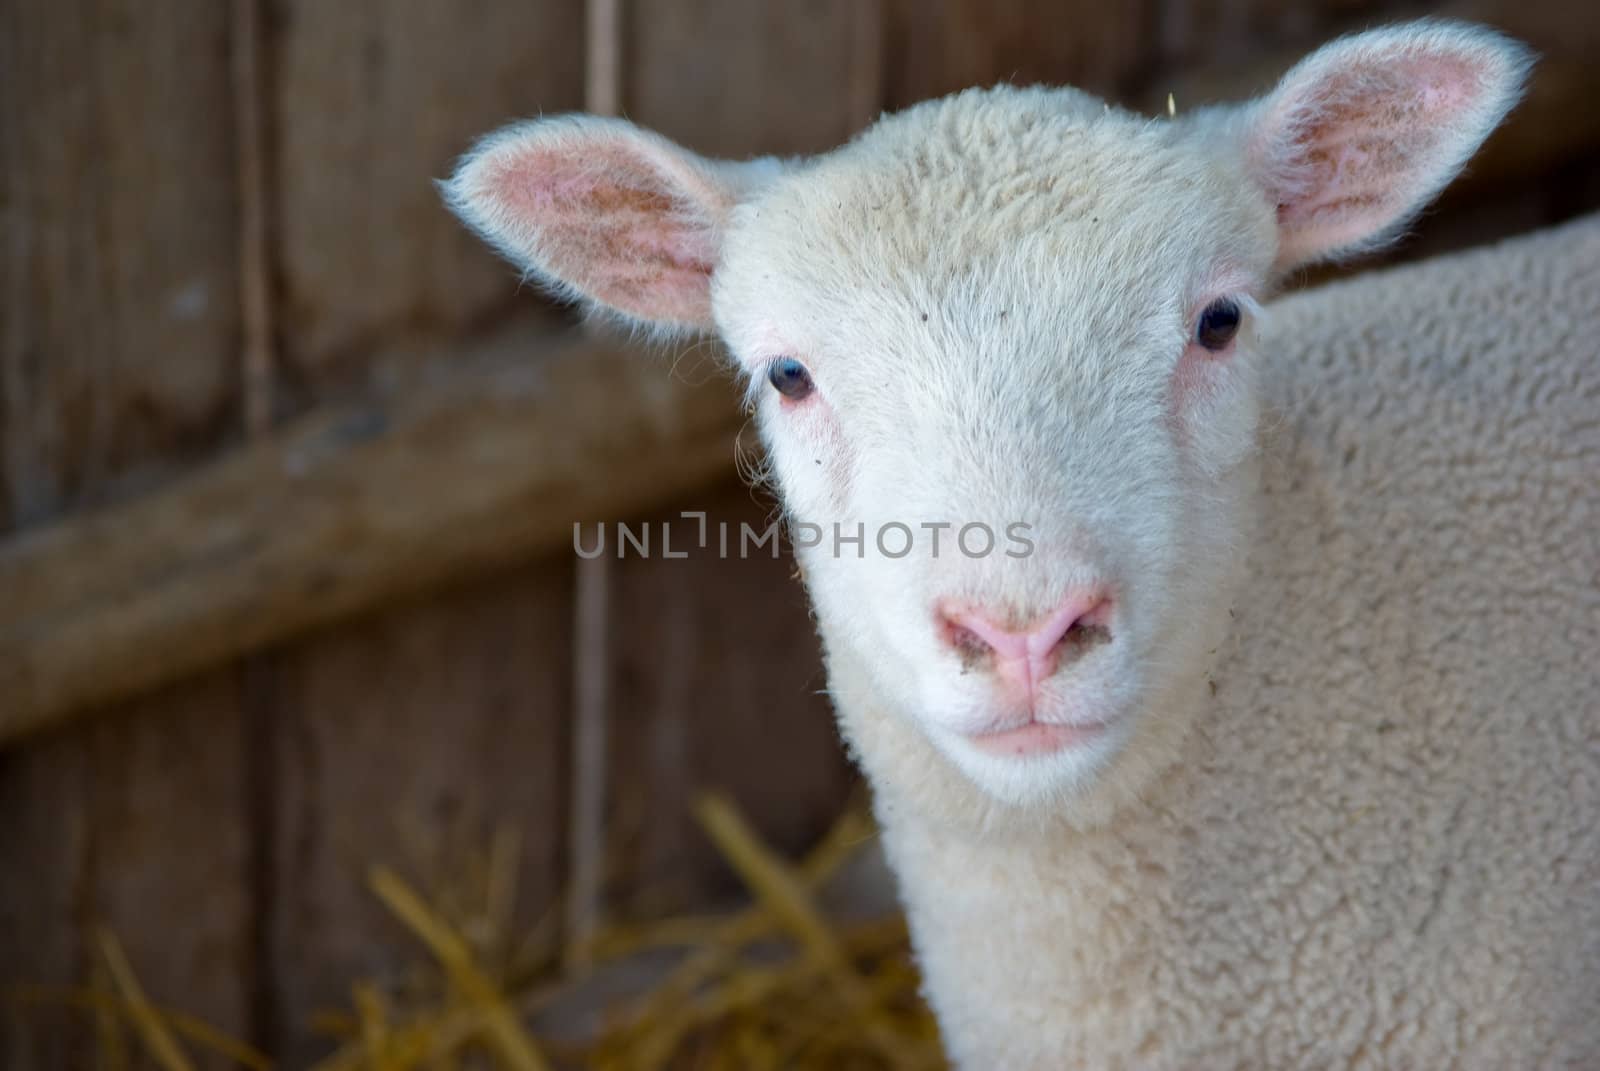 a very cute little baby lamb looks at the camera